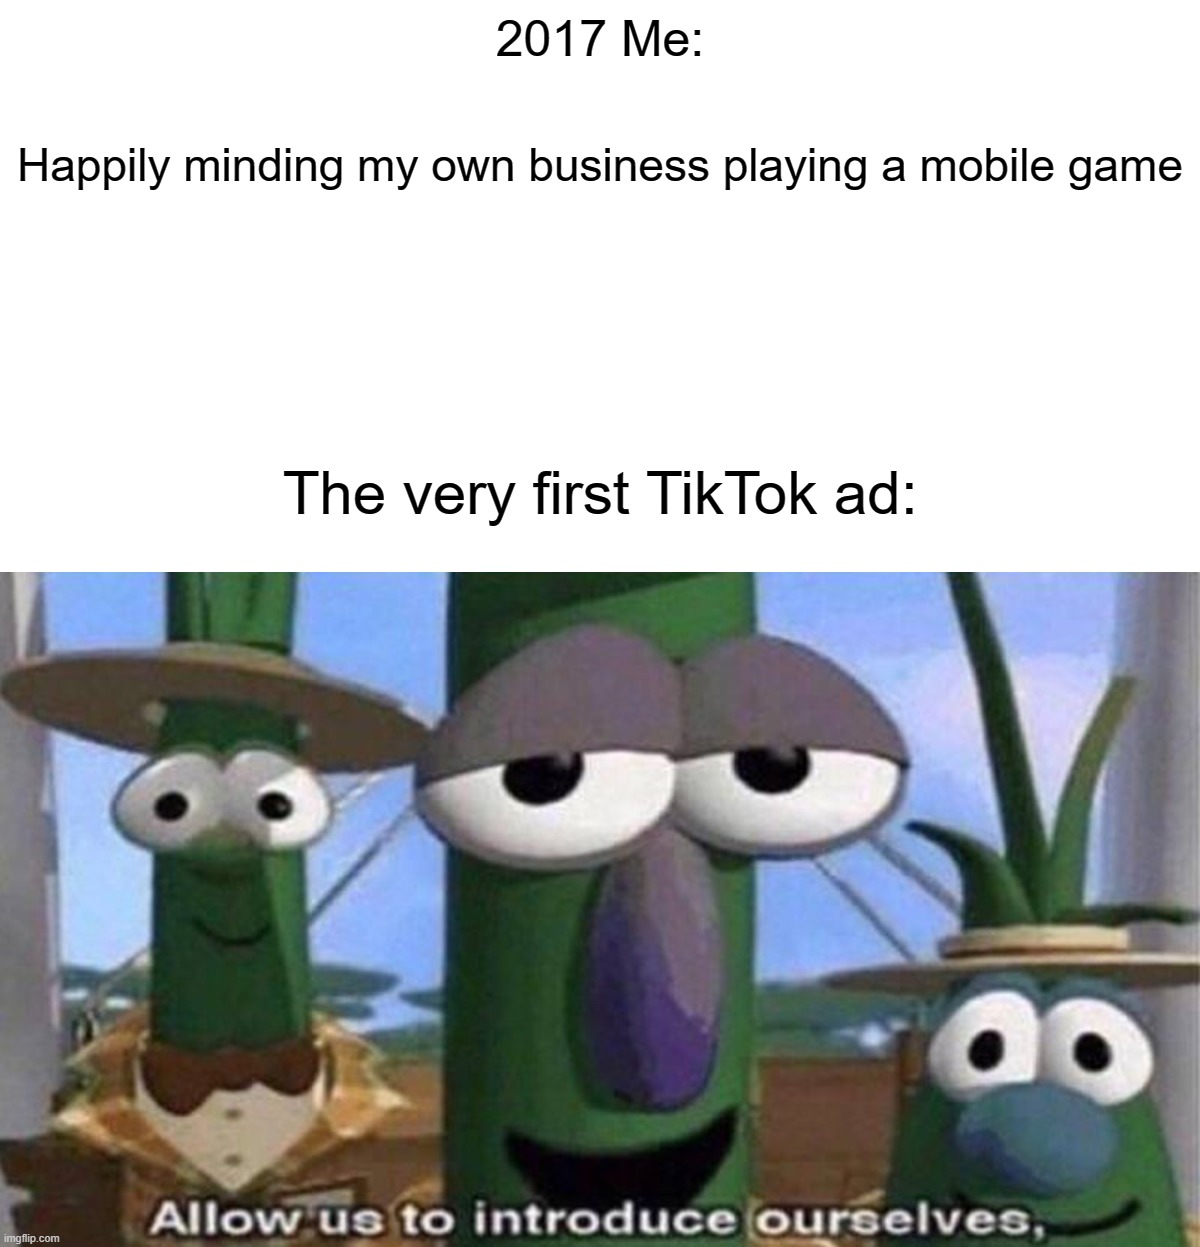 The plague began in late 2017 with a simple advertisement... |  2017 Me:; Happily minding my own business playing a mobile game; The very first TikTok ad: | image tagged in veggietales 'allow us to introduce ourselfs',tiktok,memes,funny,2017,advertisement | made w/ Imgflip meme maker